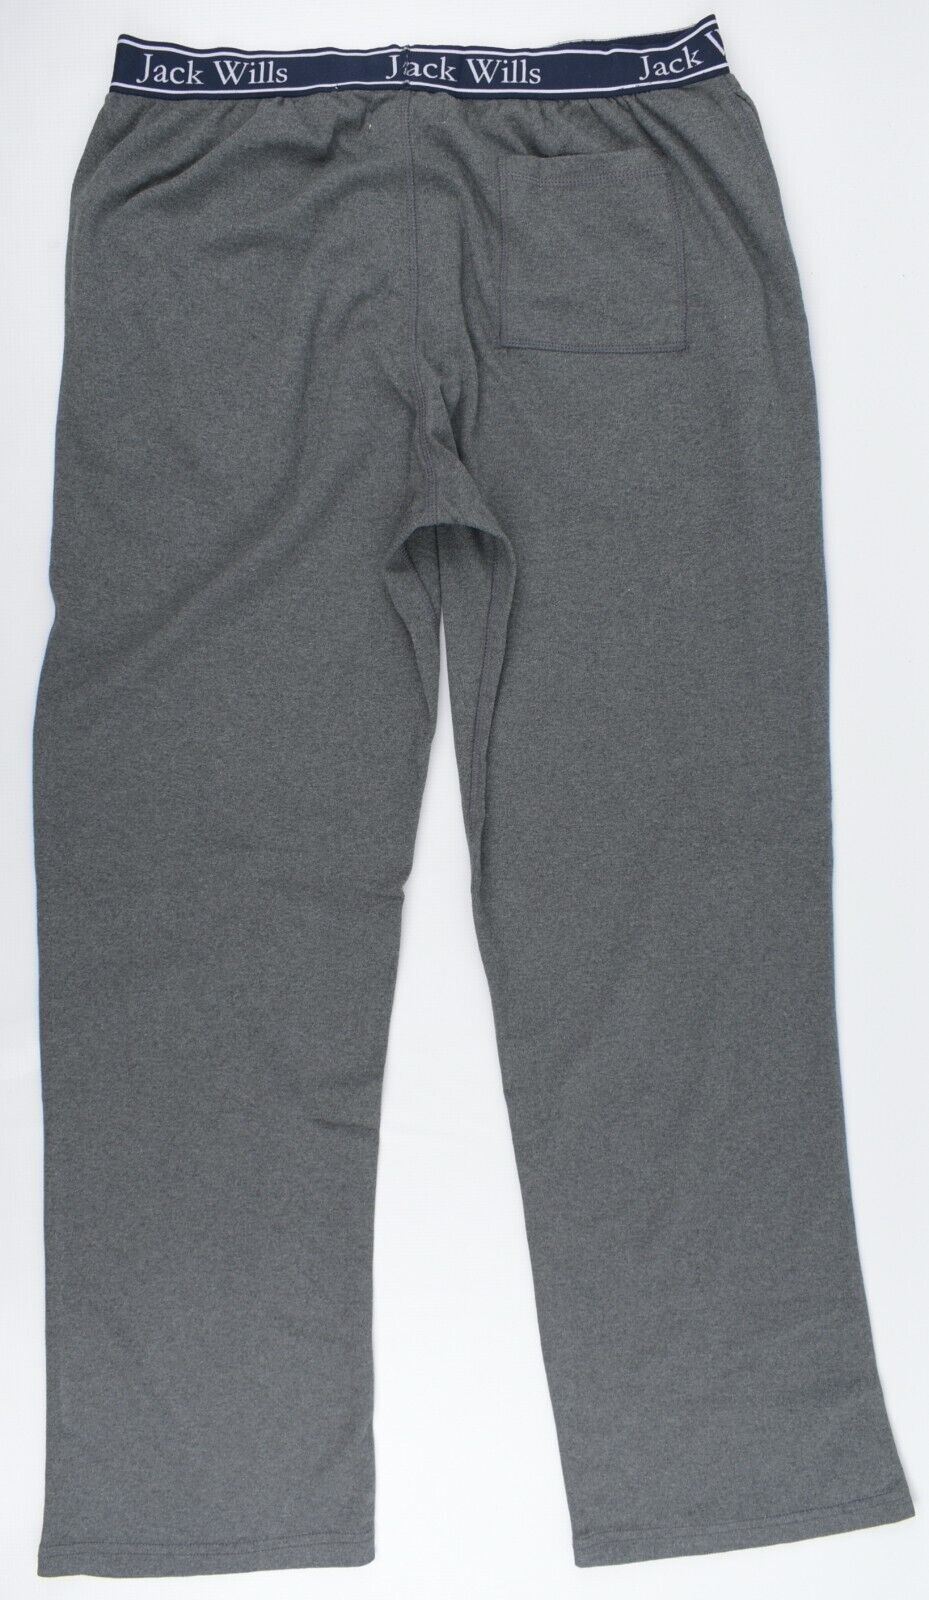 JACK WILLS Men's Lounge Joggers, Lounging Pants, Charcoal Grey, size M